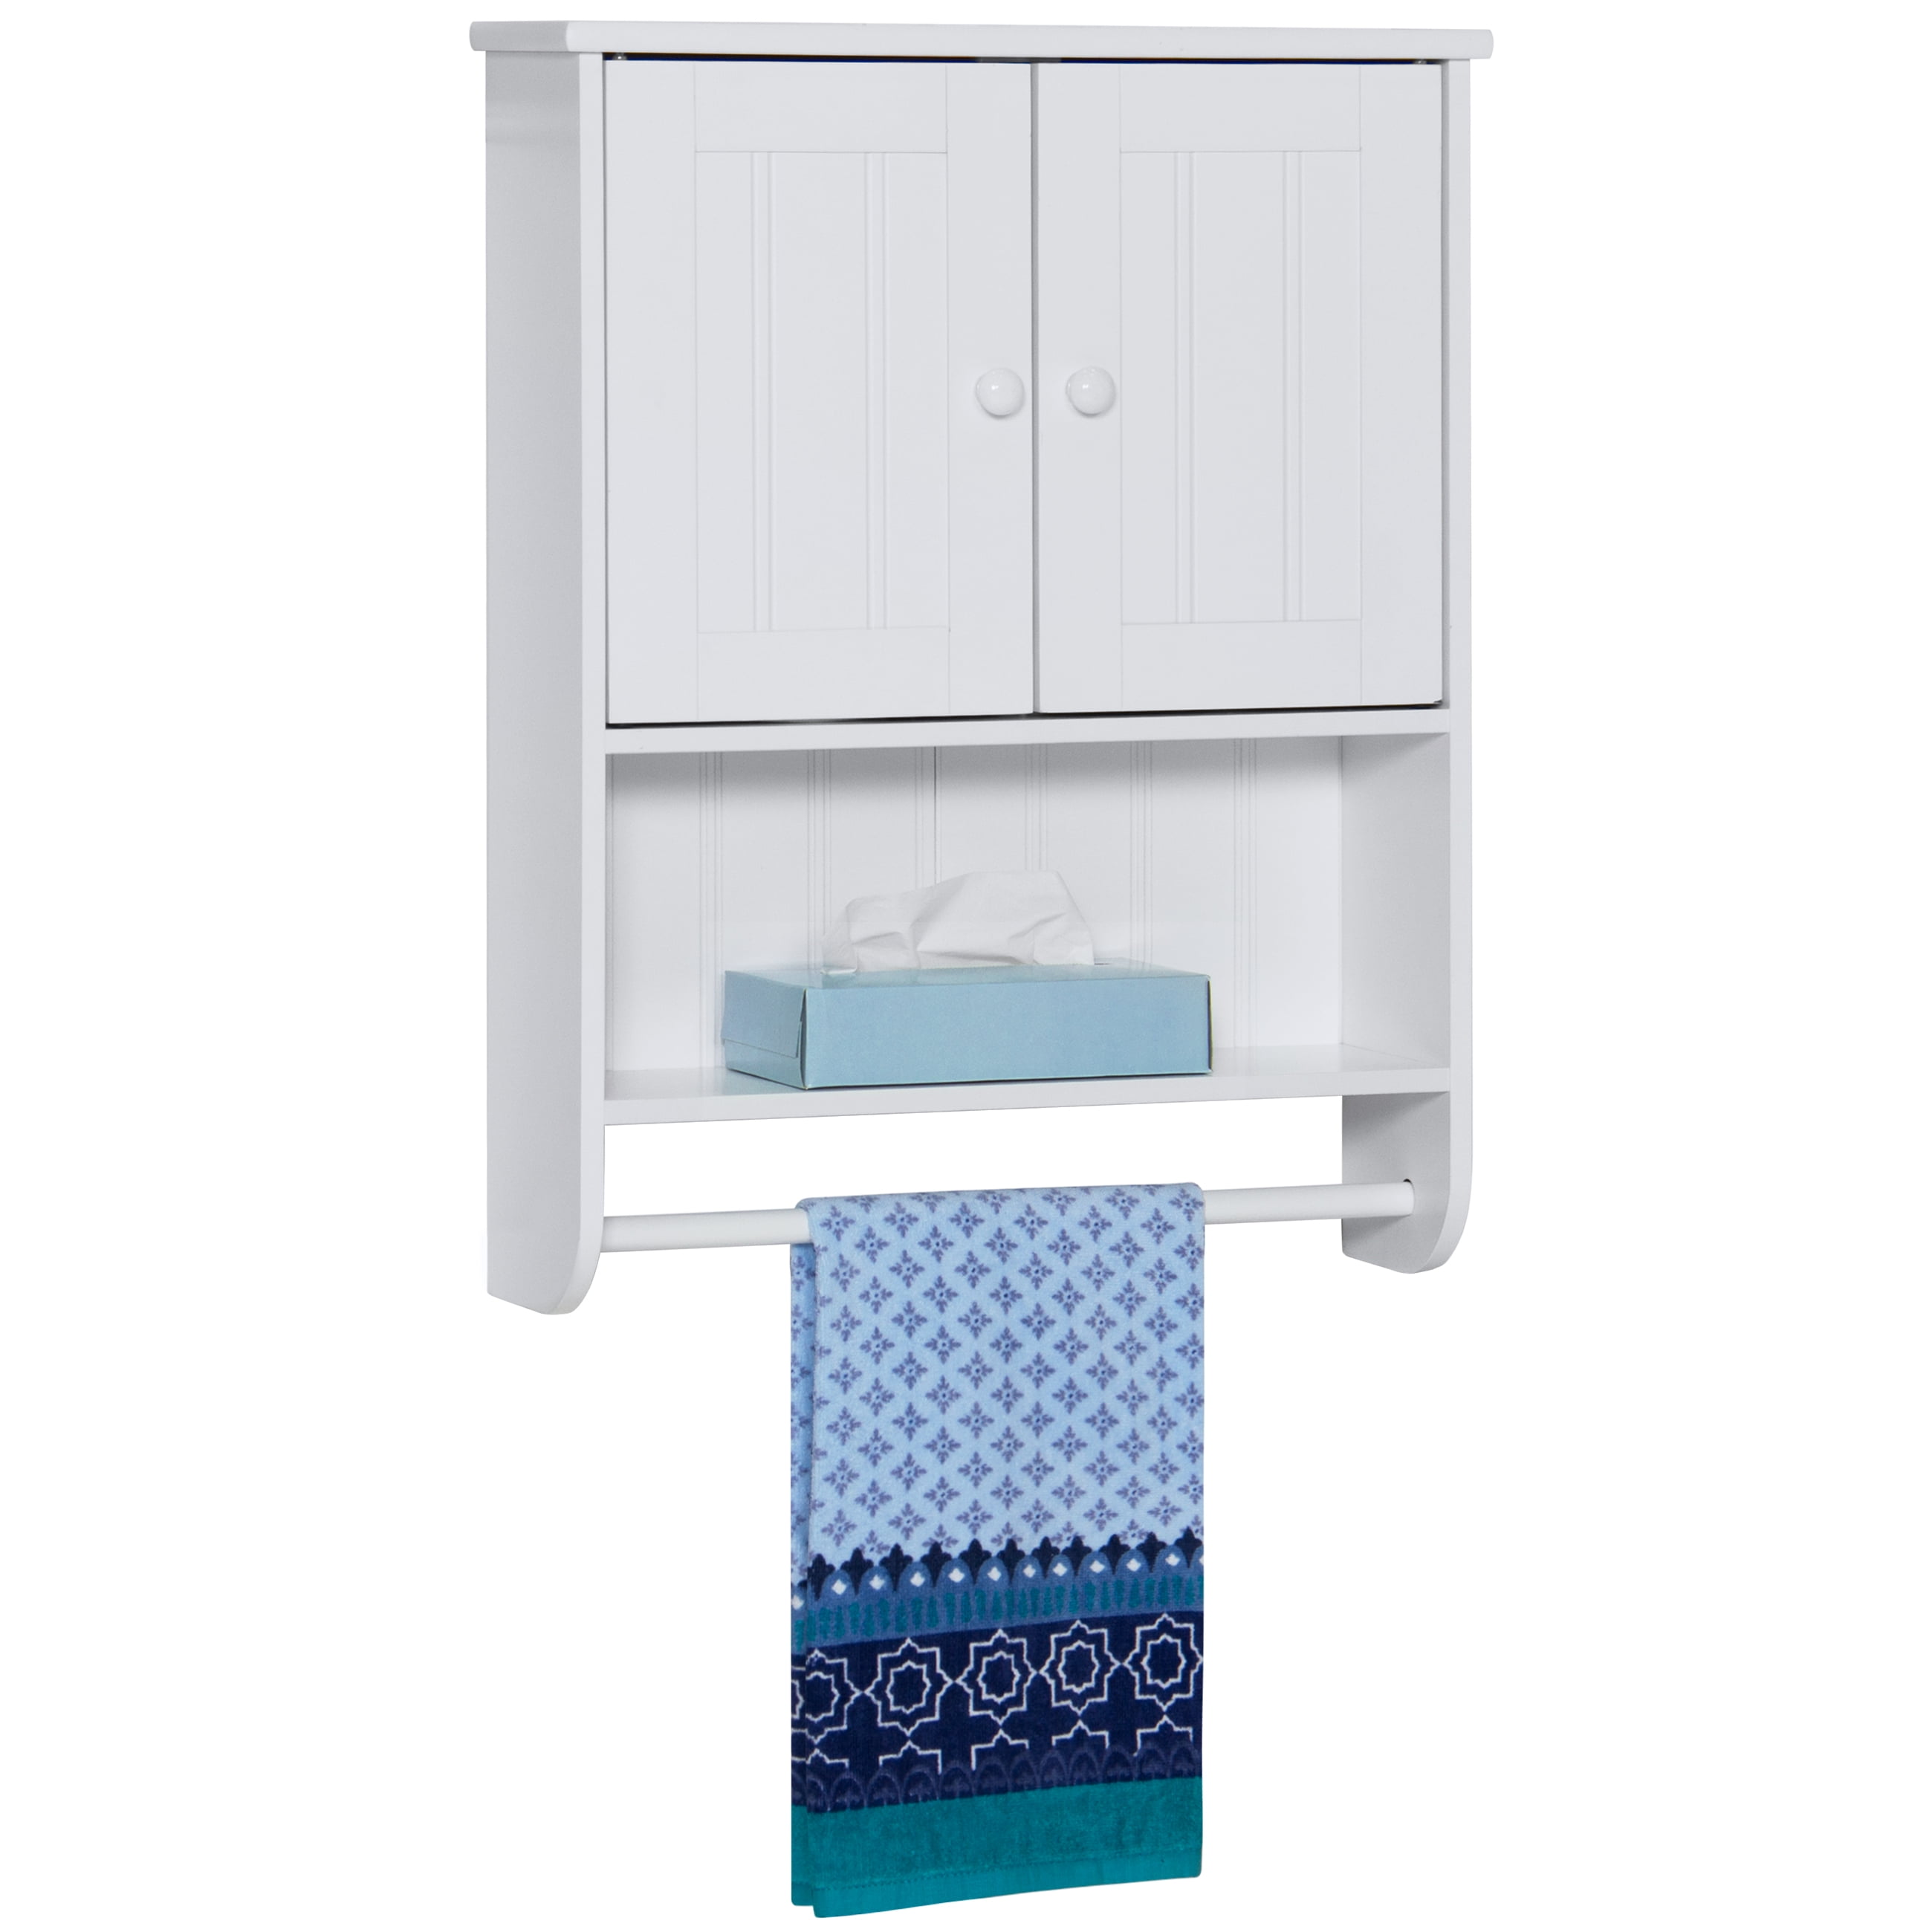 Wall Cabinet W Double Doors Towel Bar, Over The Toilet Wall Cabinet With Towel Bar